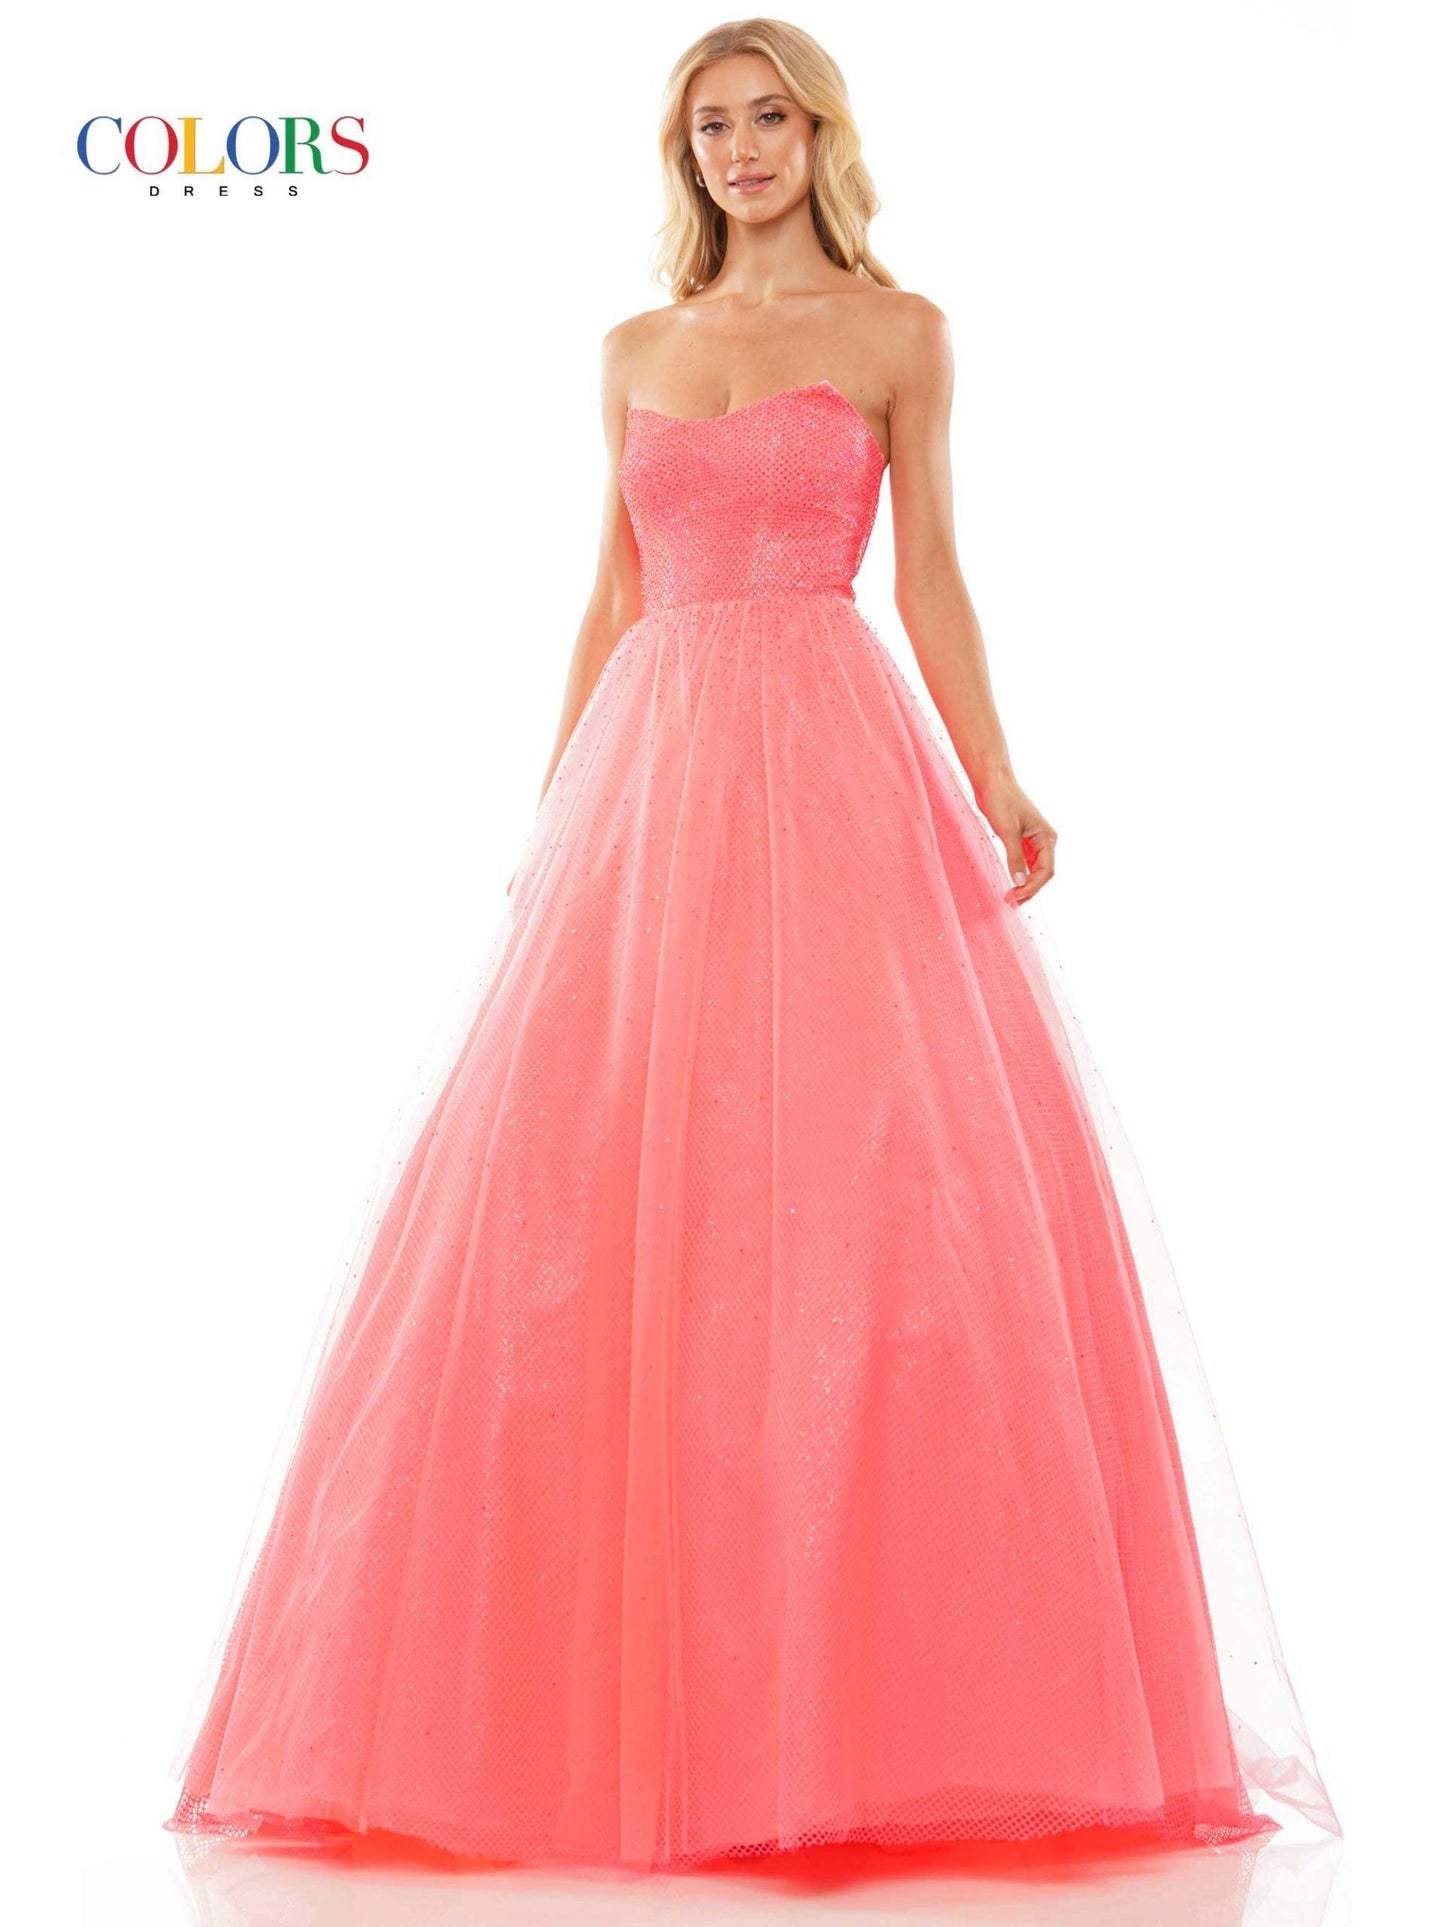 Colors Prom Long Strapless Dress 2939 - The Dress Outlet